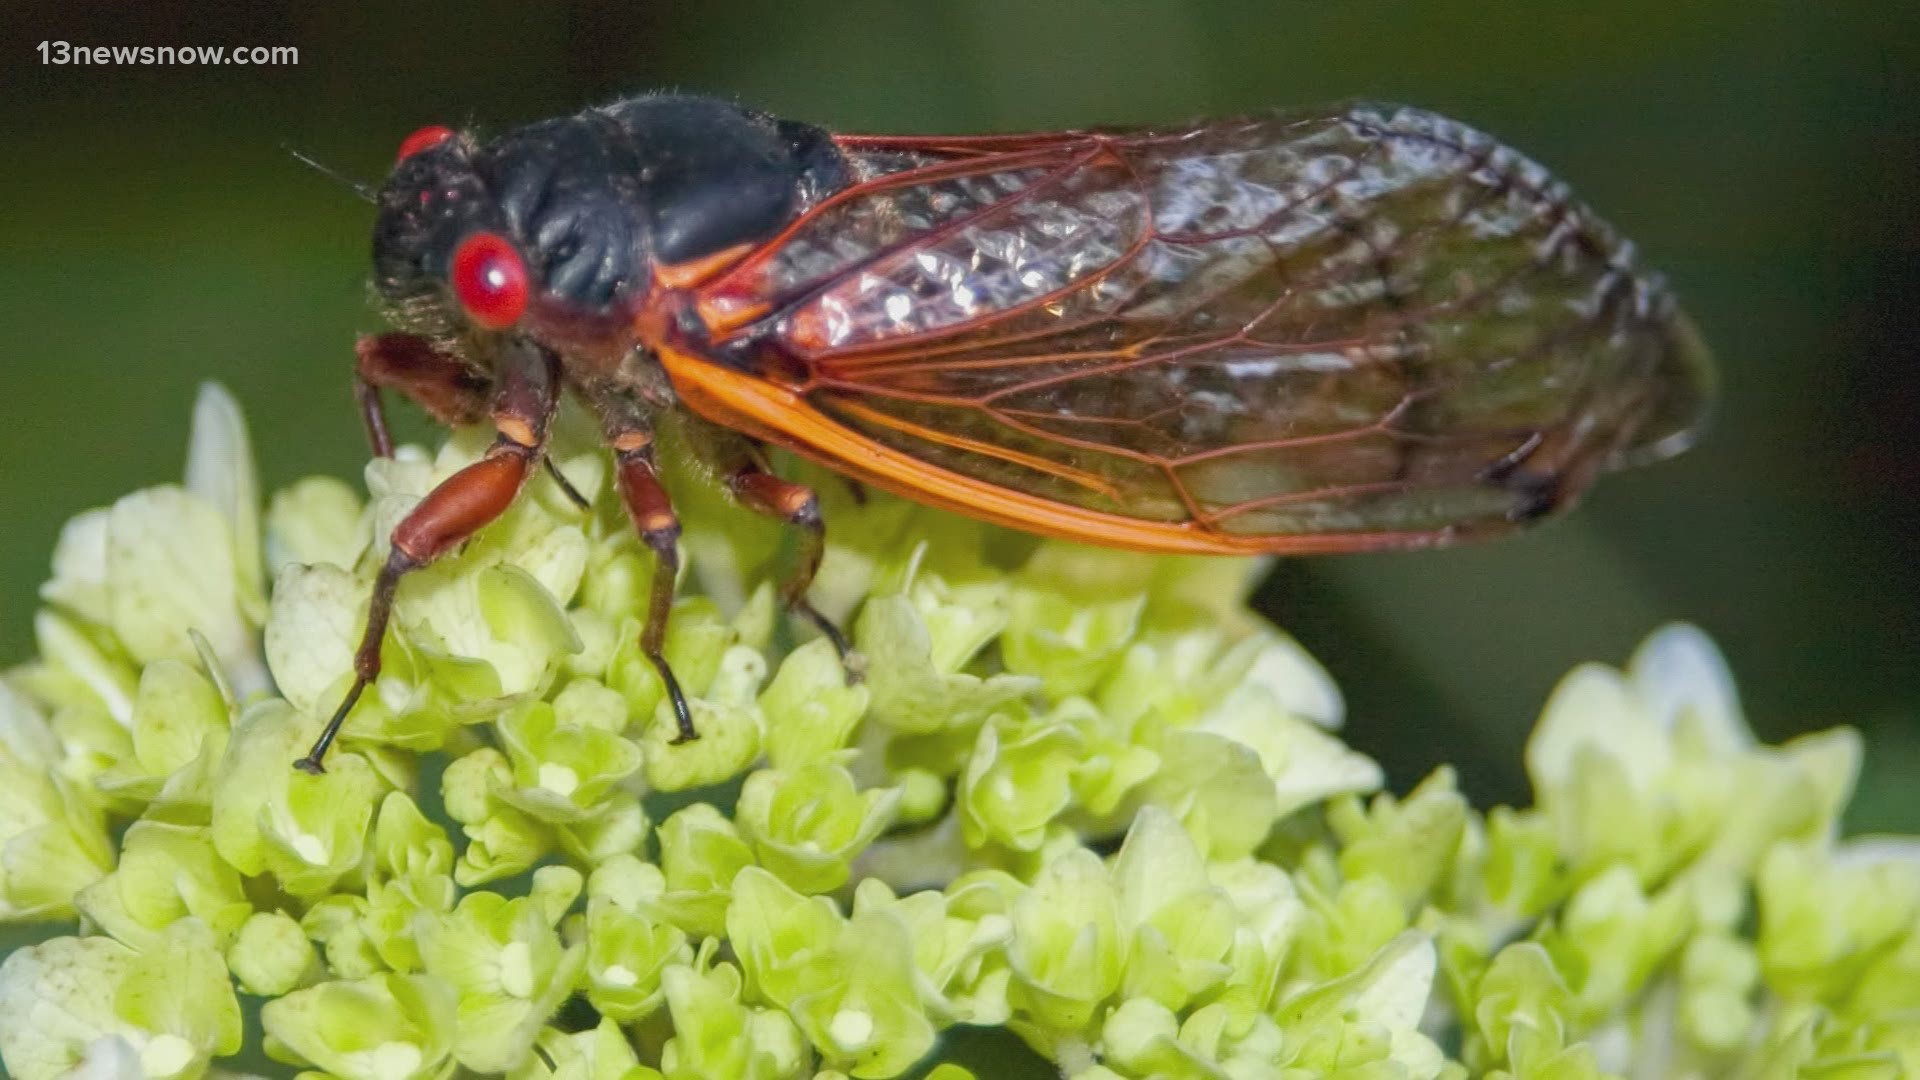 The noisy cicadas are expected to emerge soon in spring.